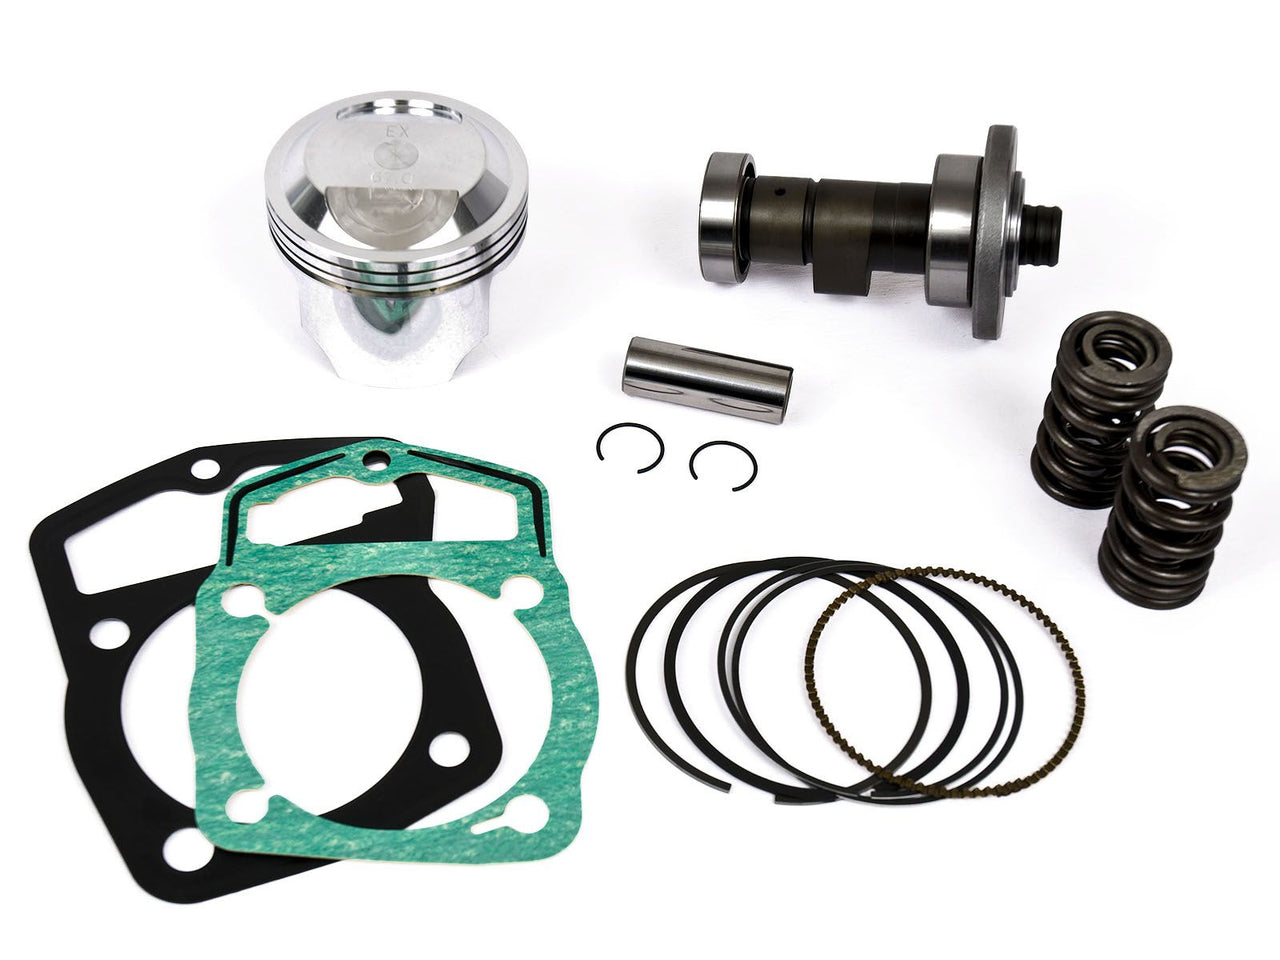 BBR 175cc Big Bore Kit with Cam - CRF150F